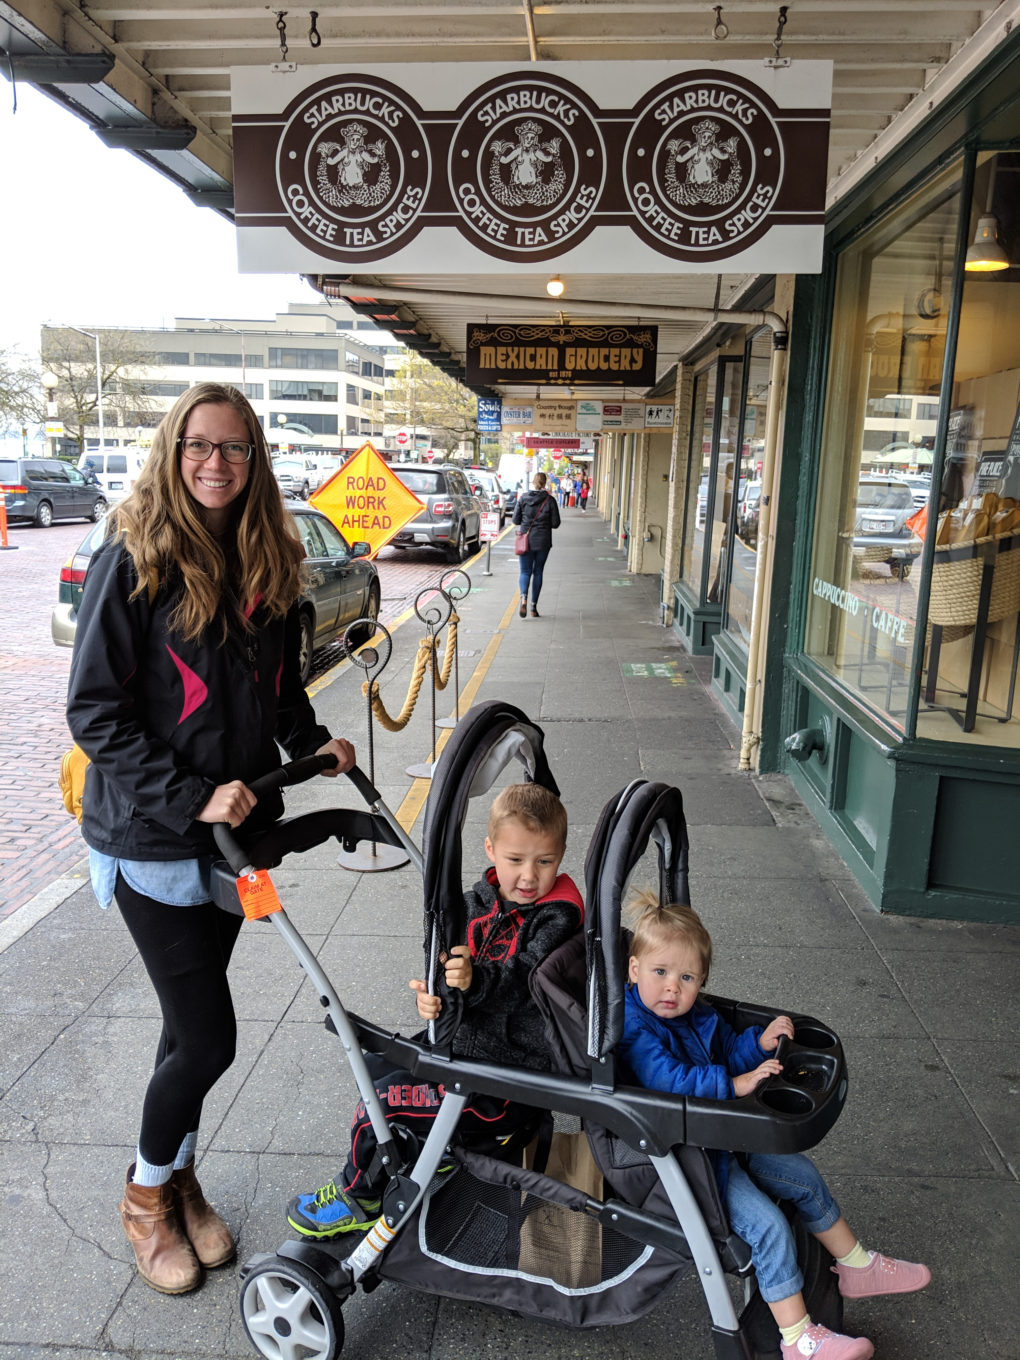 First Starbucks at Pike Place Market - How to visit Seattle with kids on a 3 day trip. Fun activities to do and where to eat.